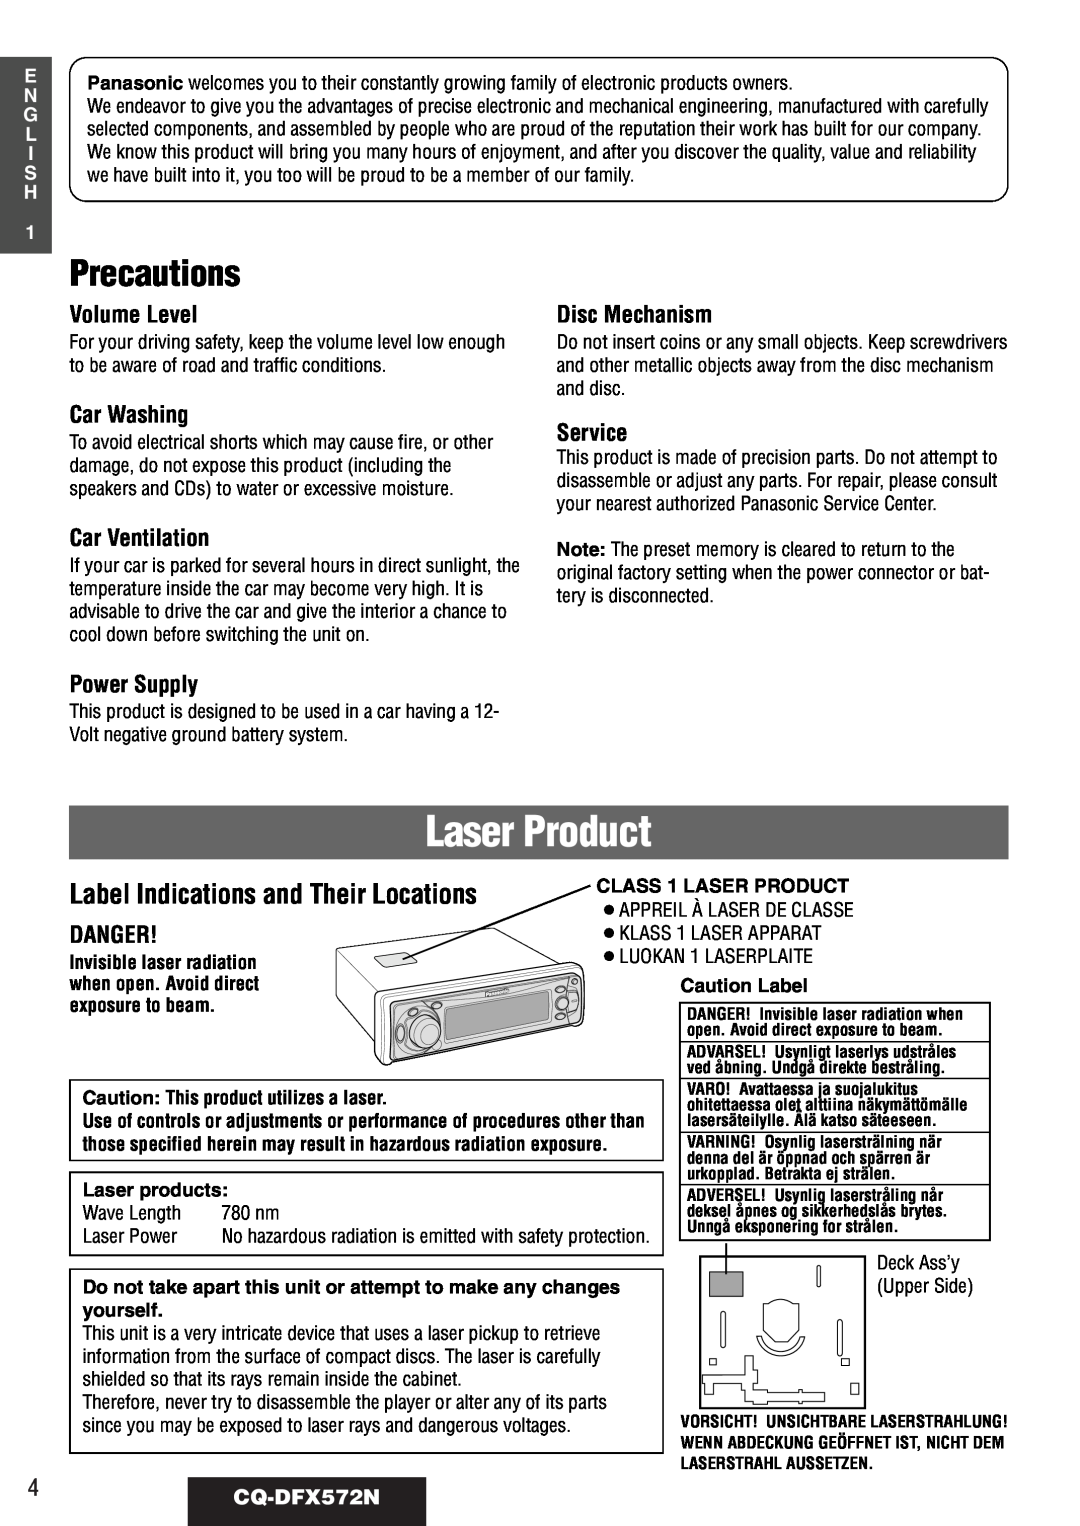 Panasonic CQ-DFX572N Laser Product, Precautions, Label Indications and Their Locations, Volume Level, Disc Mechanism 